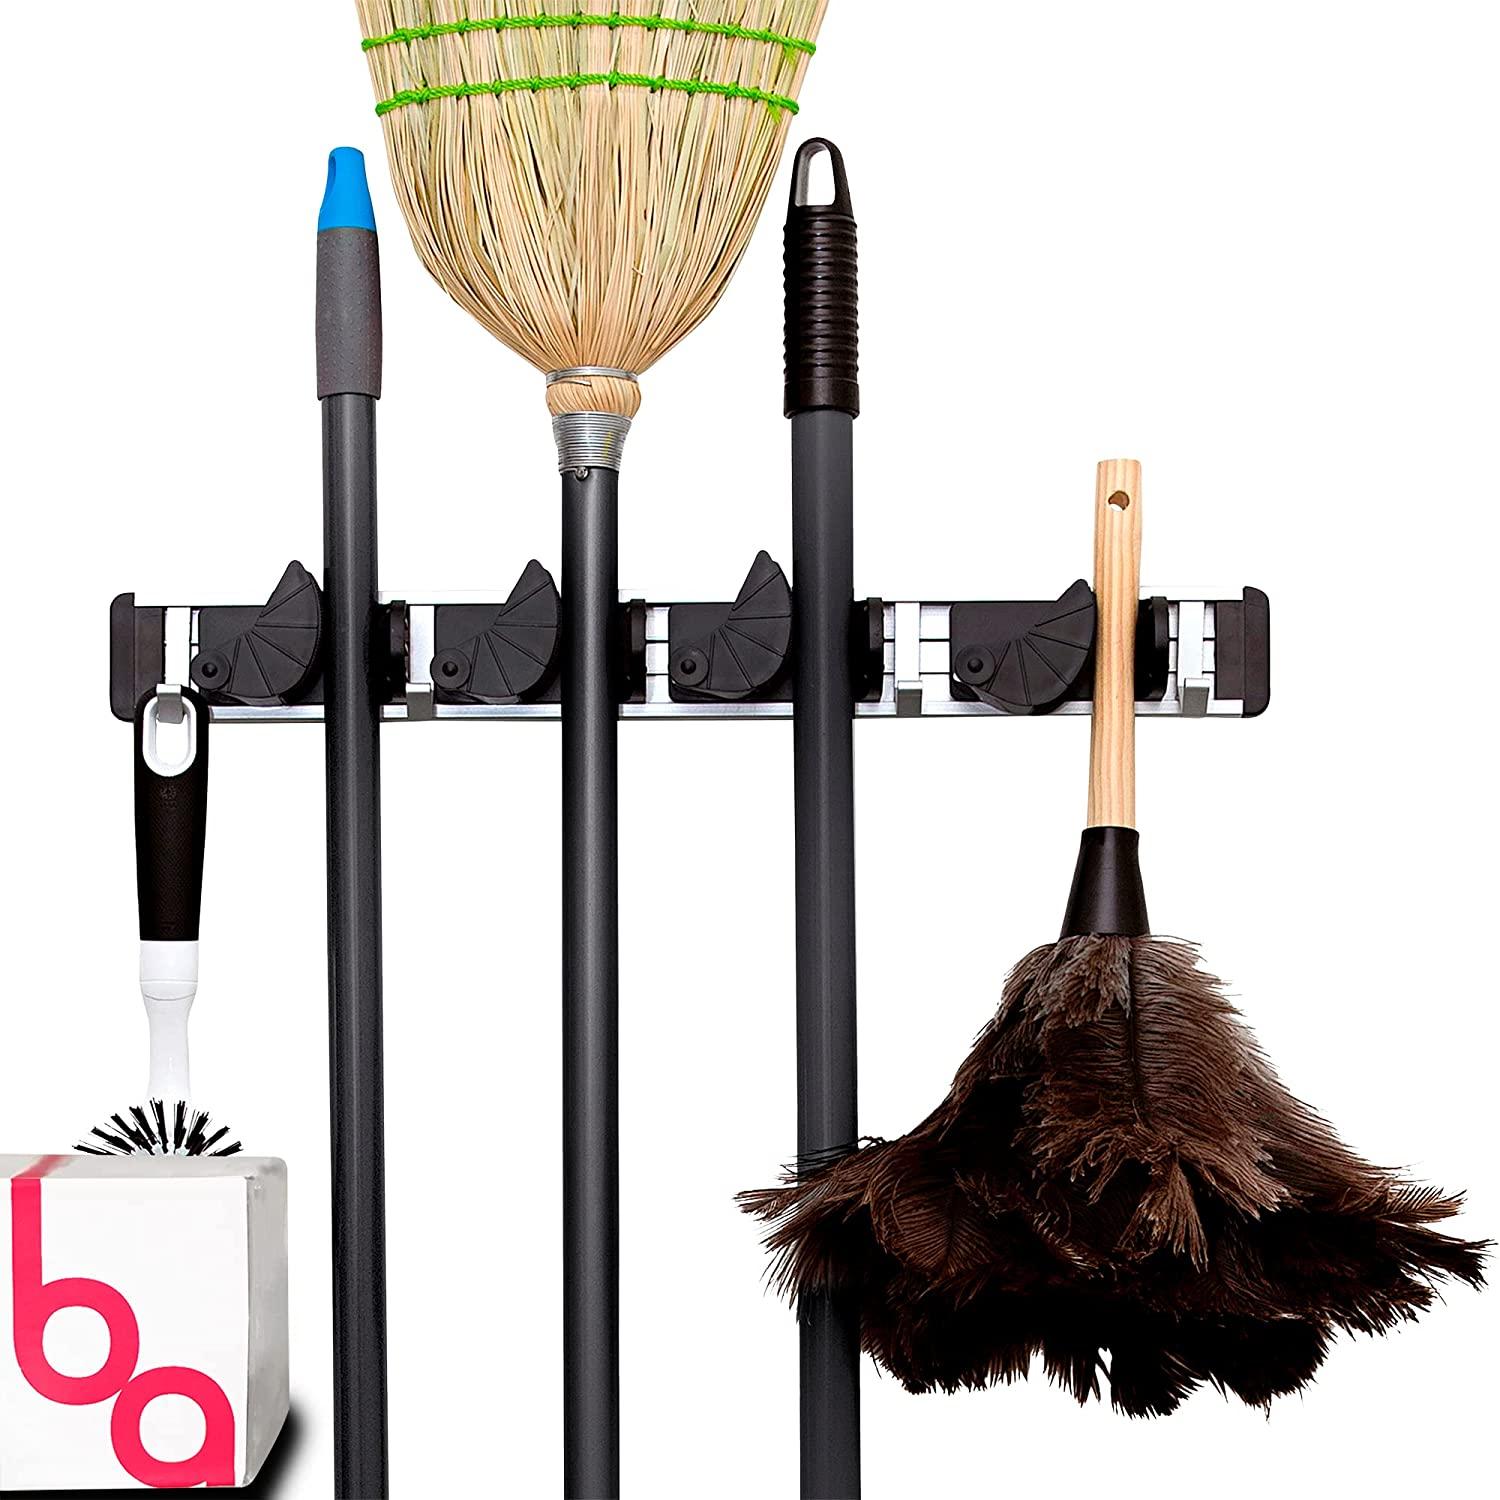 Berry Ave Broom Holder and Wall Mount Garden Tool Organizer for $8.02